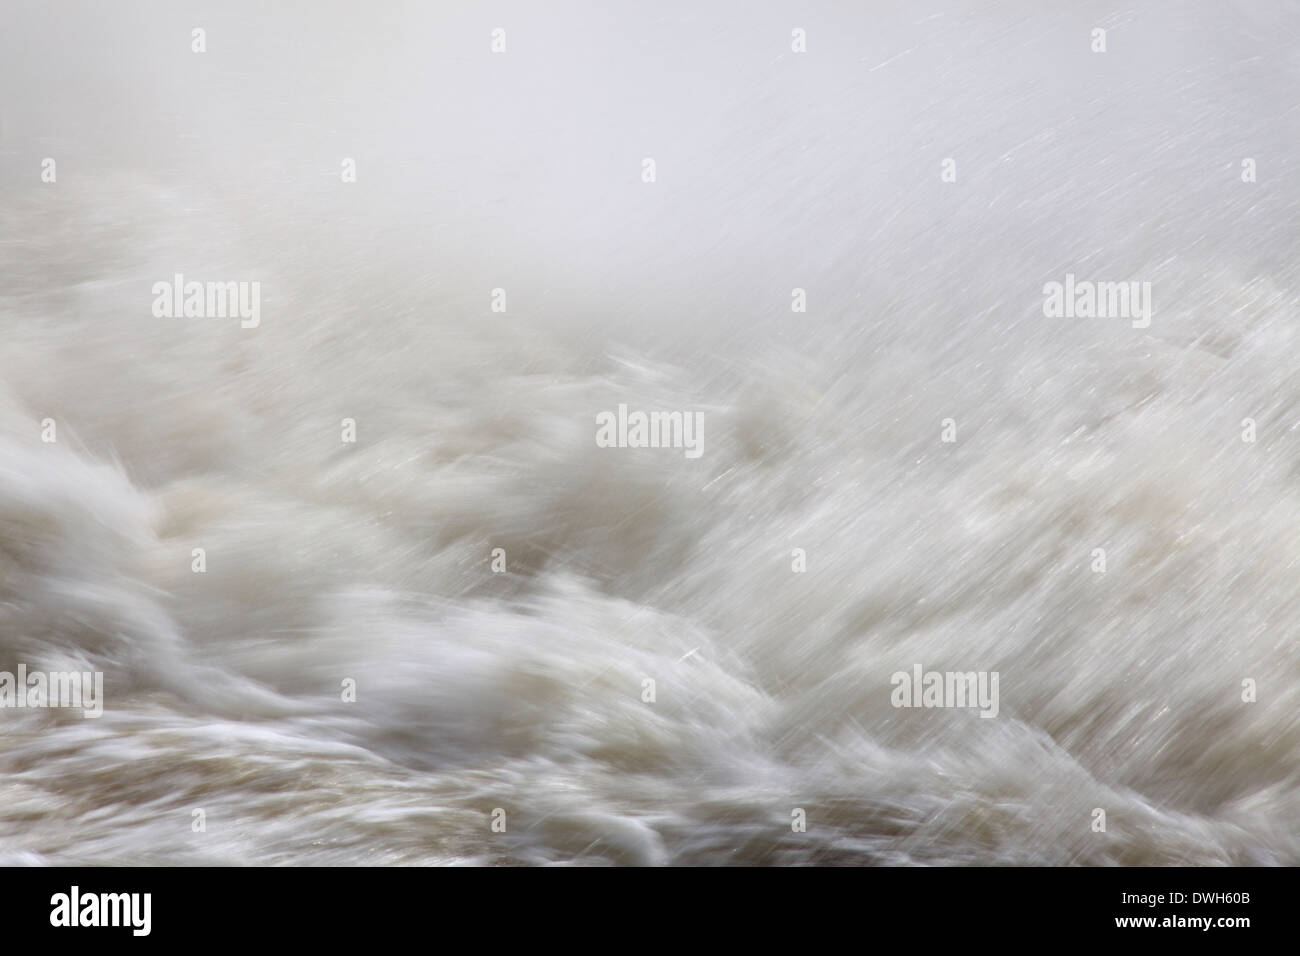 Gushing water and splashing waves in a whitewater river. Stock Photo